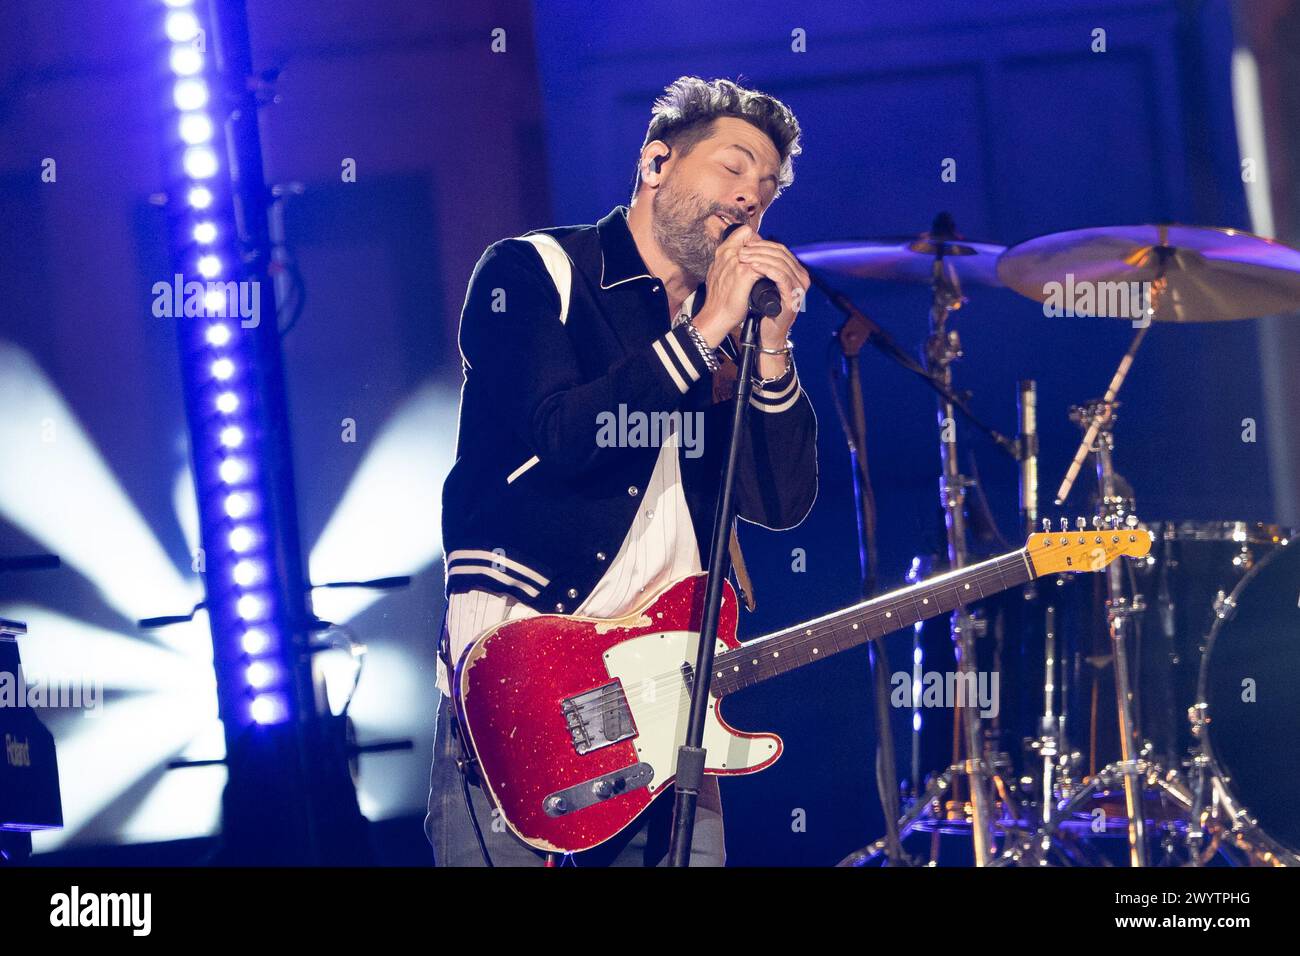 AUSTIN, TEXAS - APRIL 07: In this image released on April 07, 2024, Matthew Ramsey of Old Dominion performs on the 2024 CMT Music Awards stage on April 3, 2024, at the University of Texas at Austin in Austin, Texas.  (Photo by Amy E. Price/ImageSPACE) Stock Photo